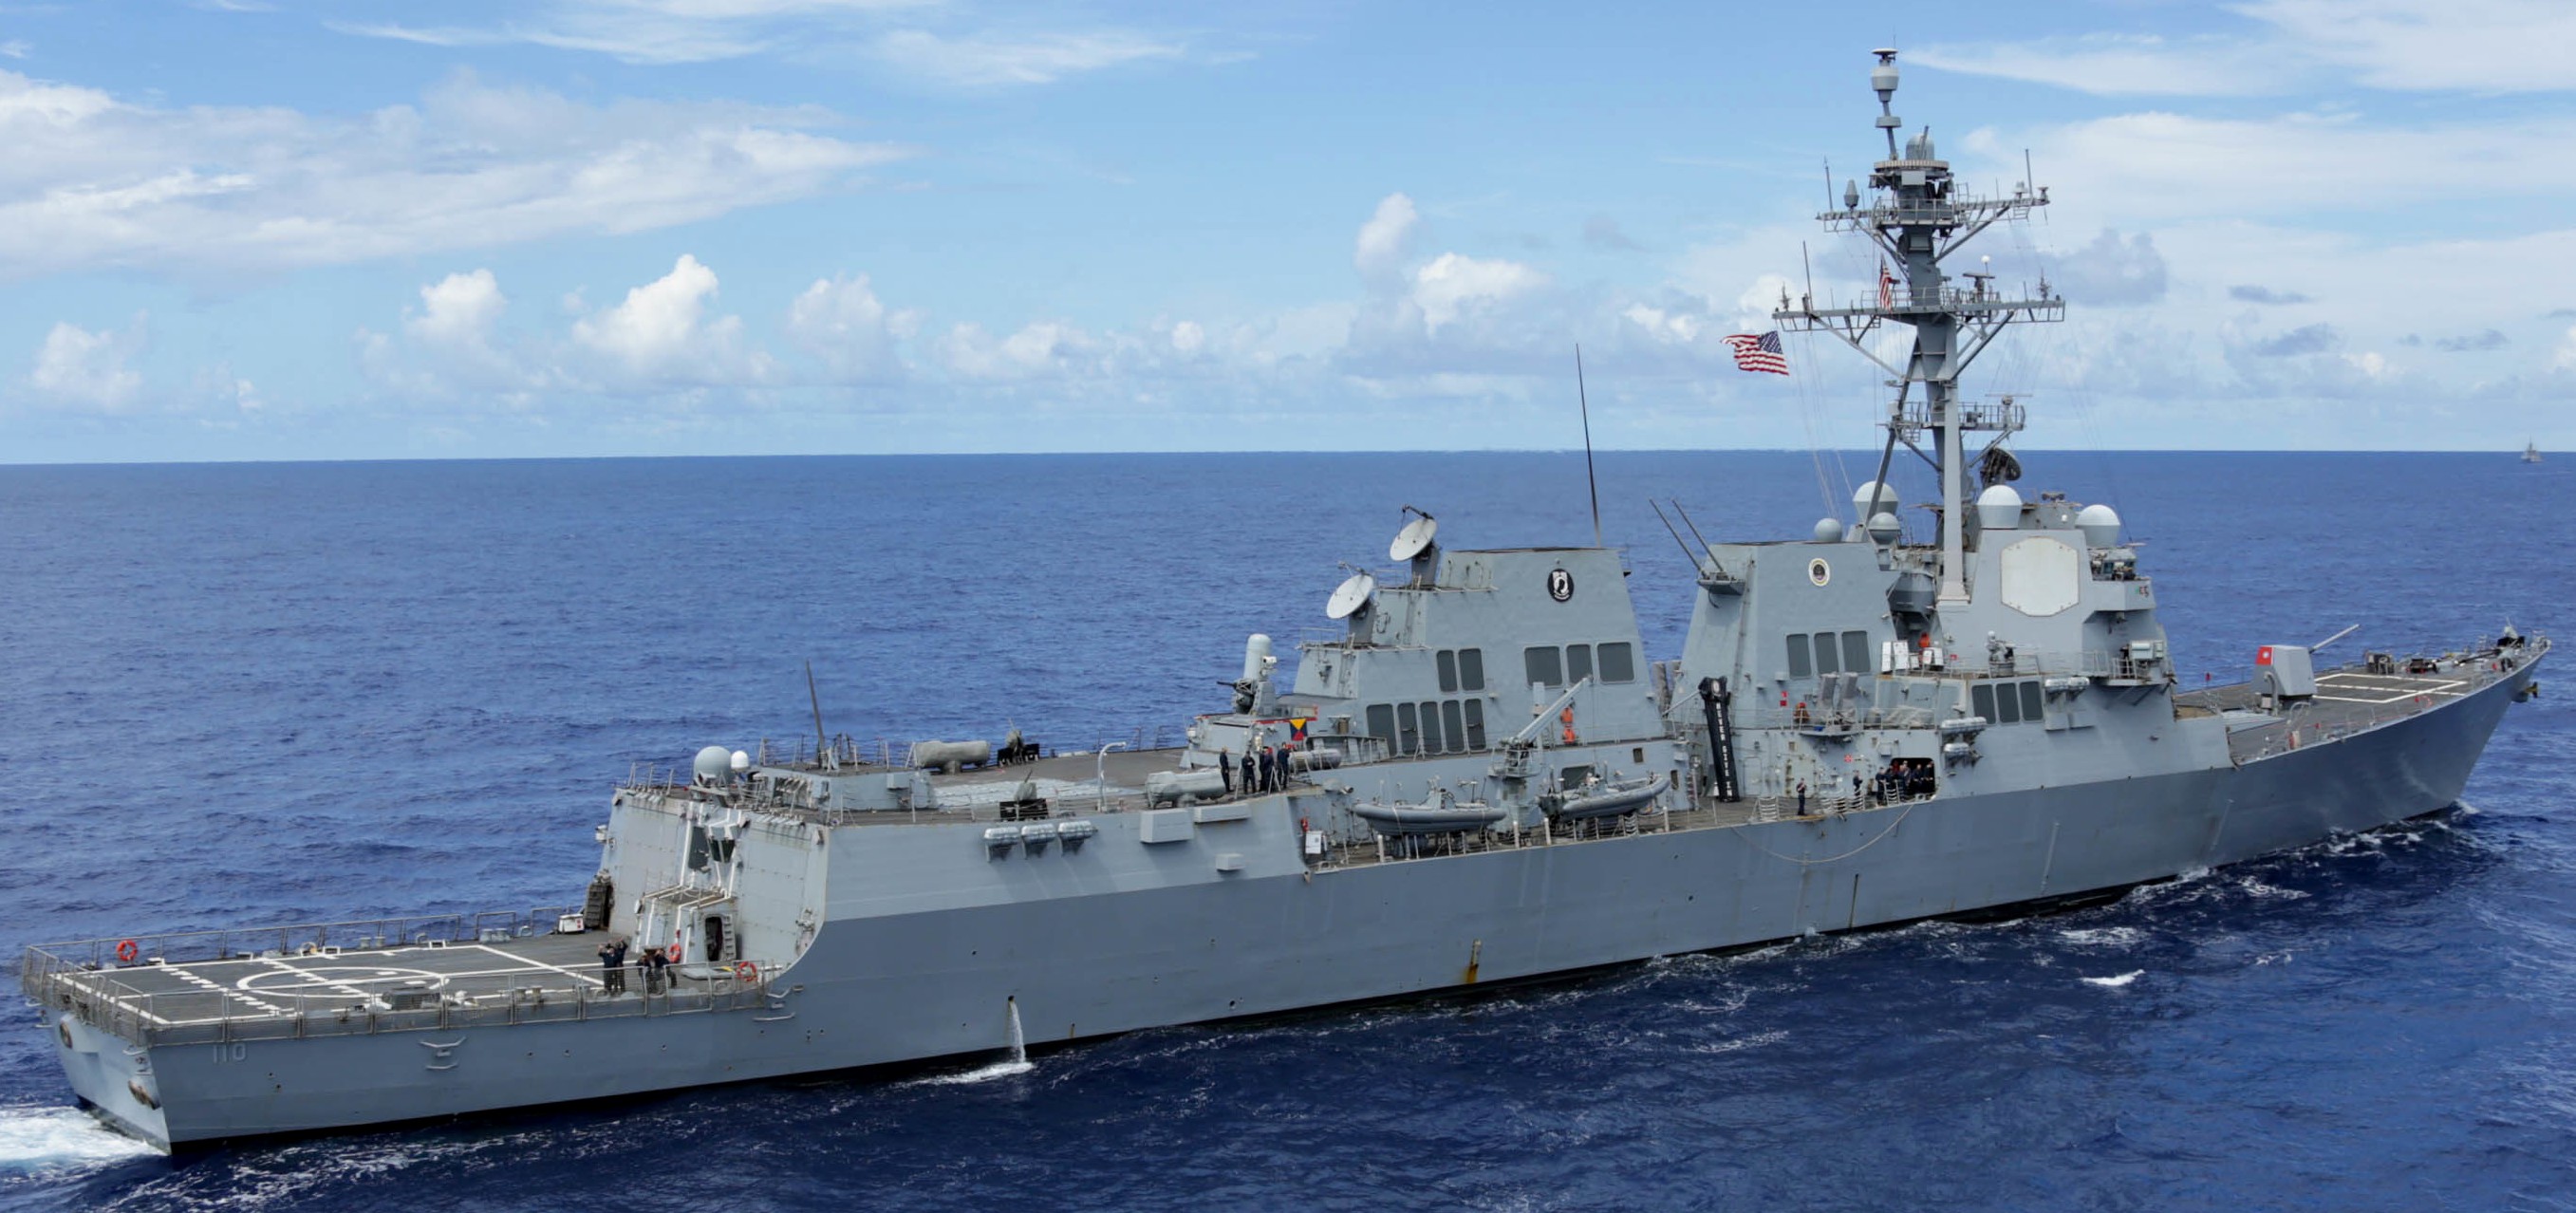 ddg-110 uss william p. lawrence arleigh burke class guided missile destroyer aegis us navy rimpac 2022 85